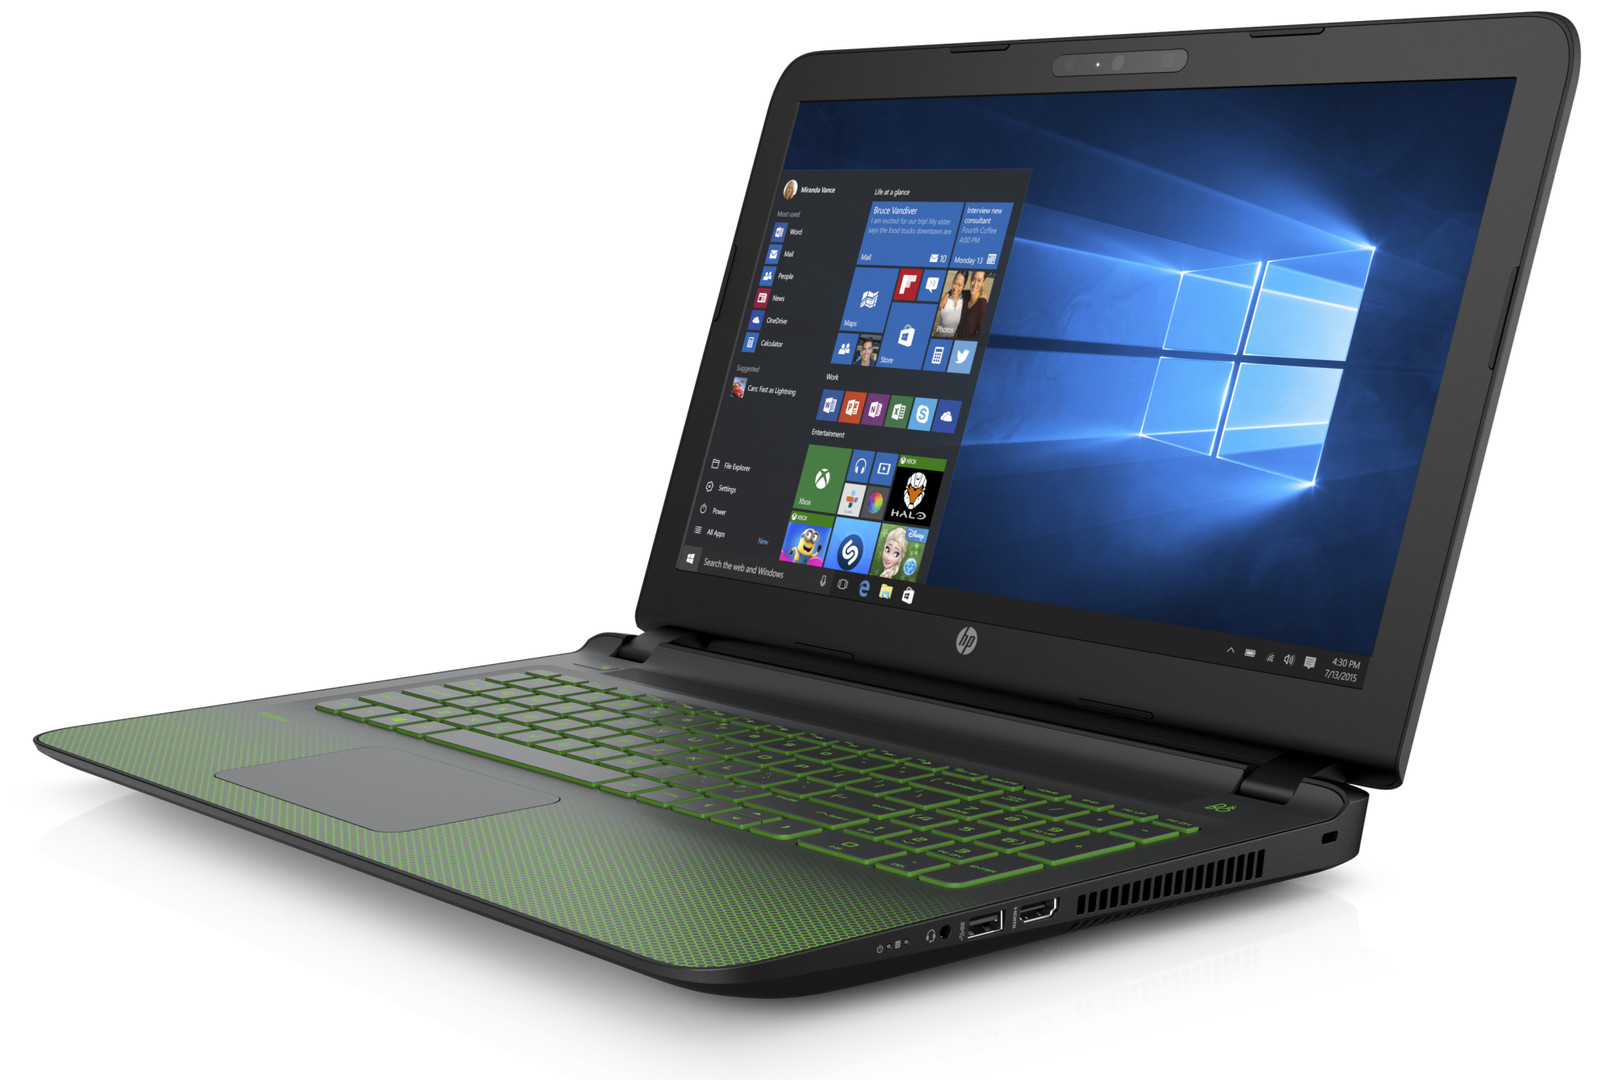 HP Pavilion 15 (i76700HQ, GTX 950M) Notebook Review NotebookCheck